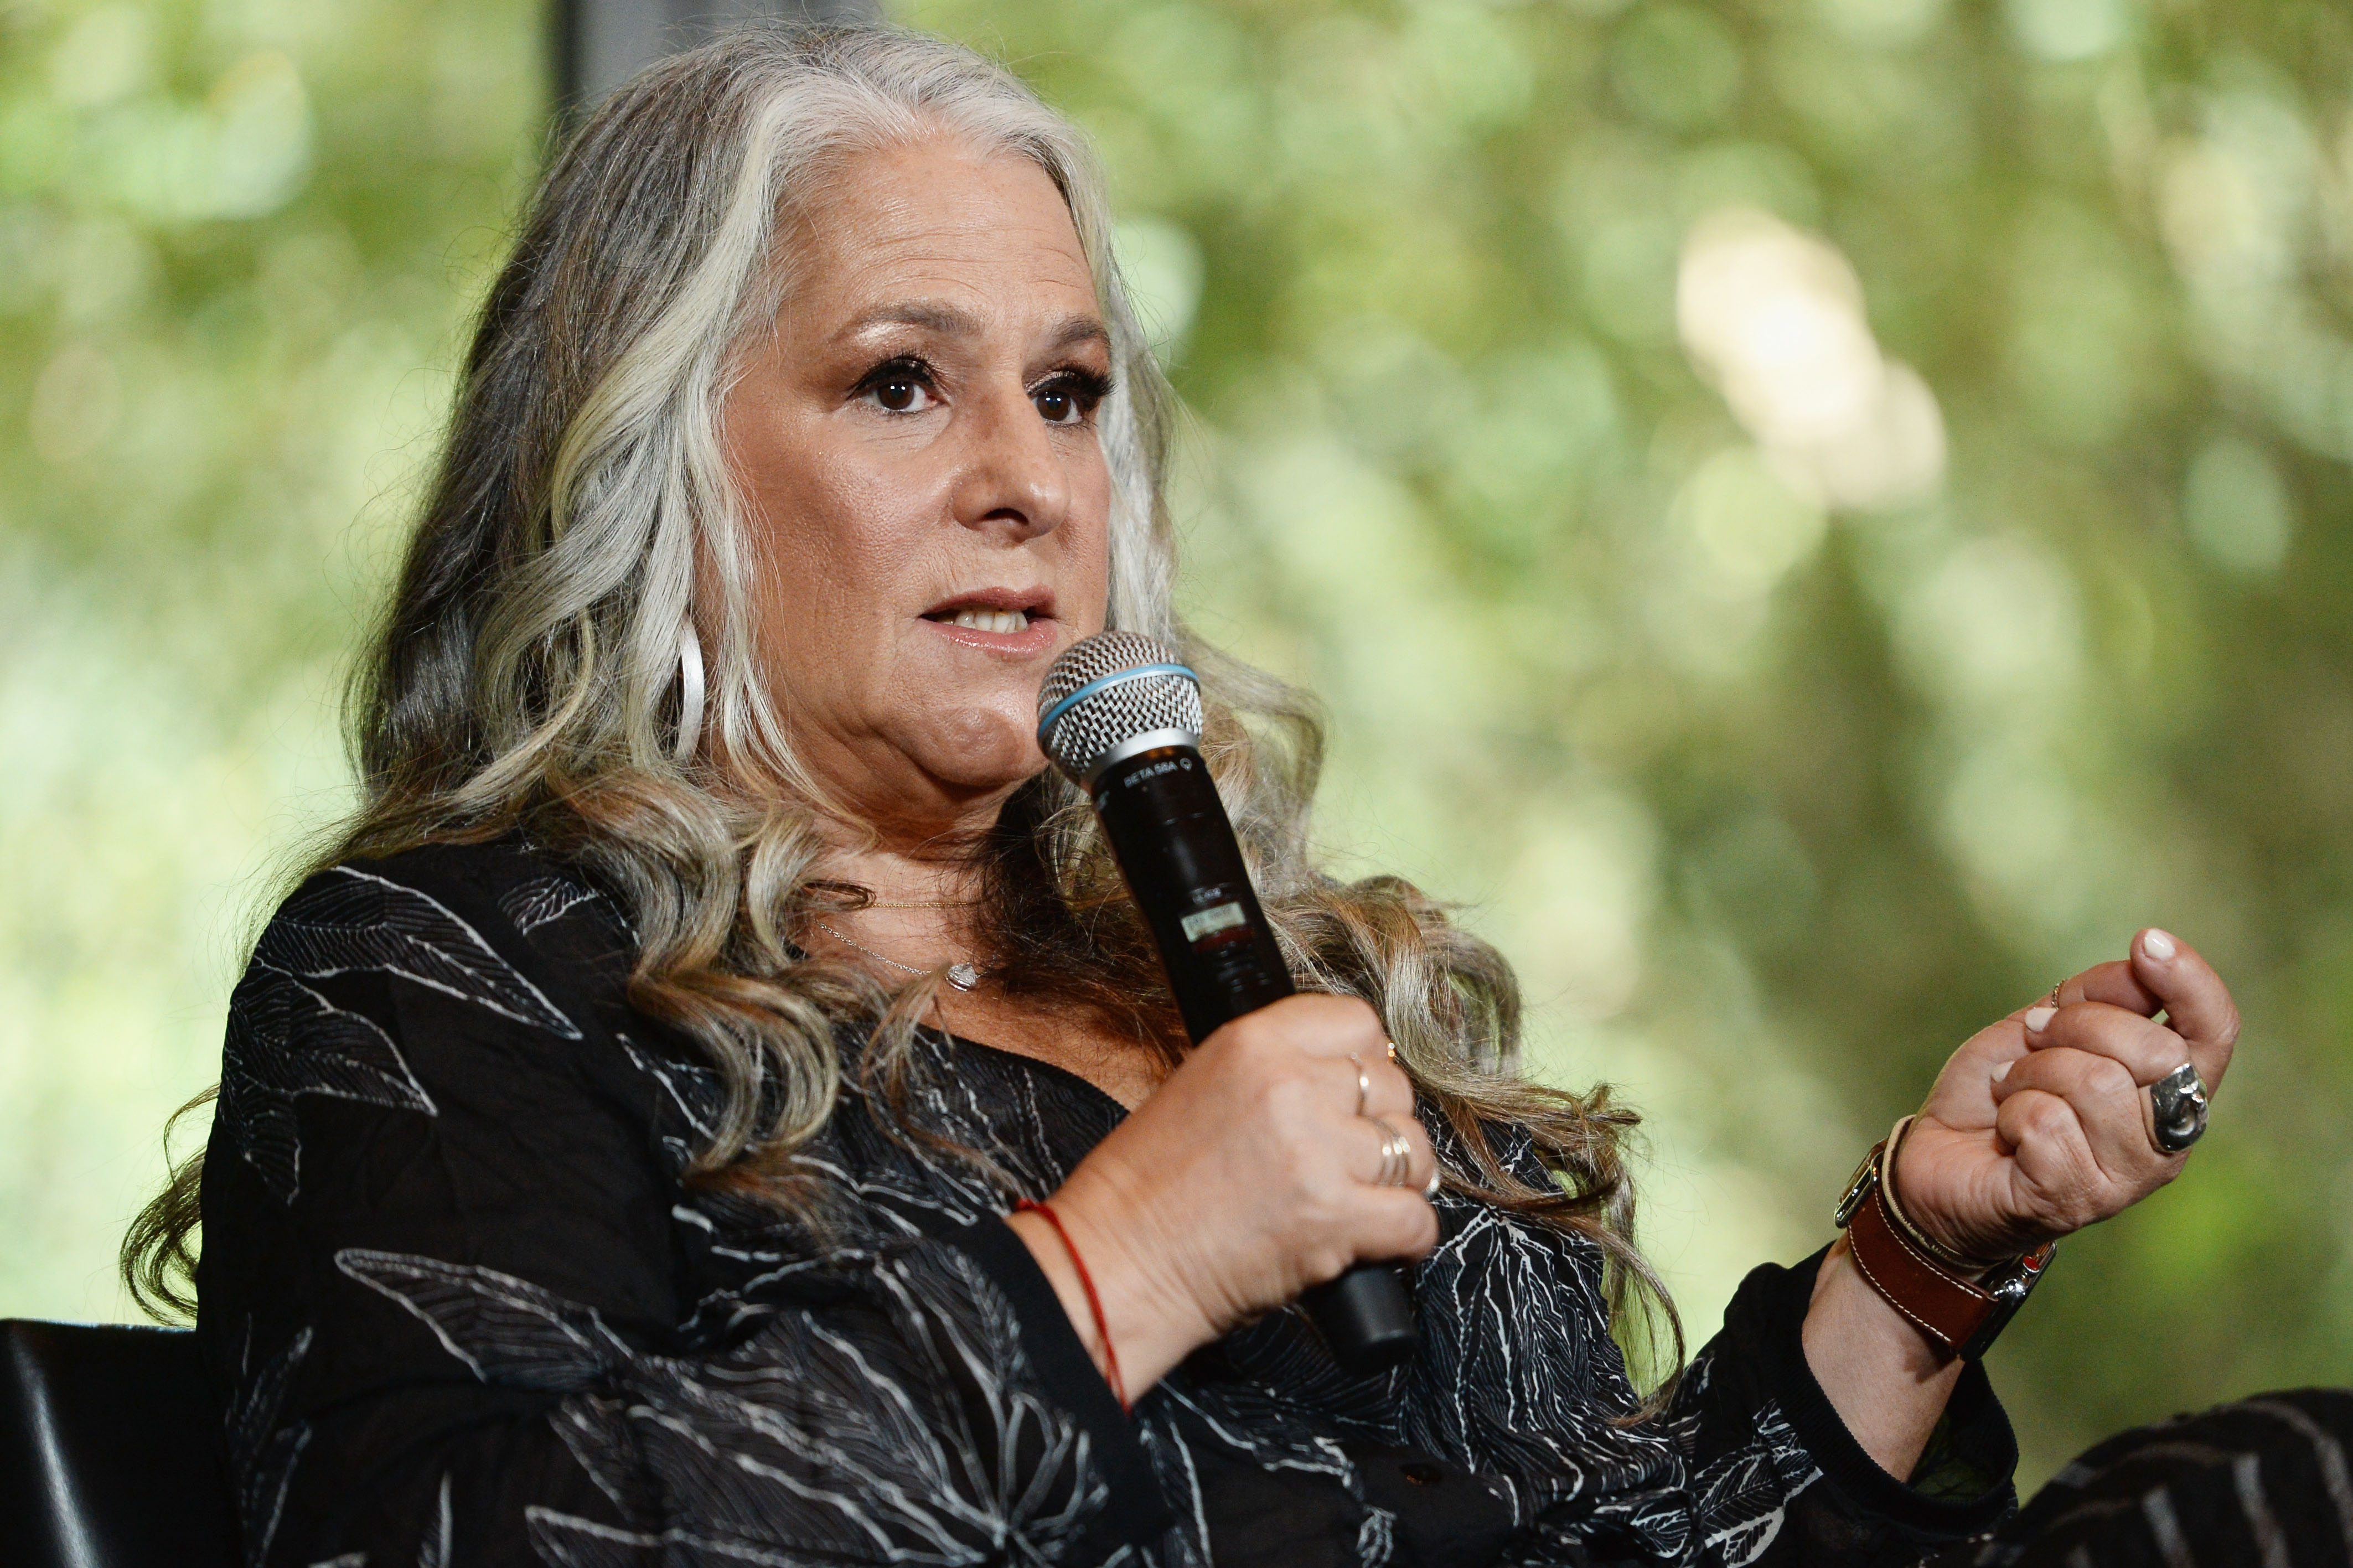 Marta Kauffman wearing a black outfit while holding a mic